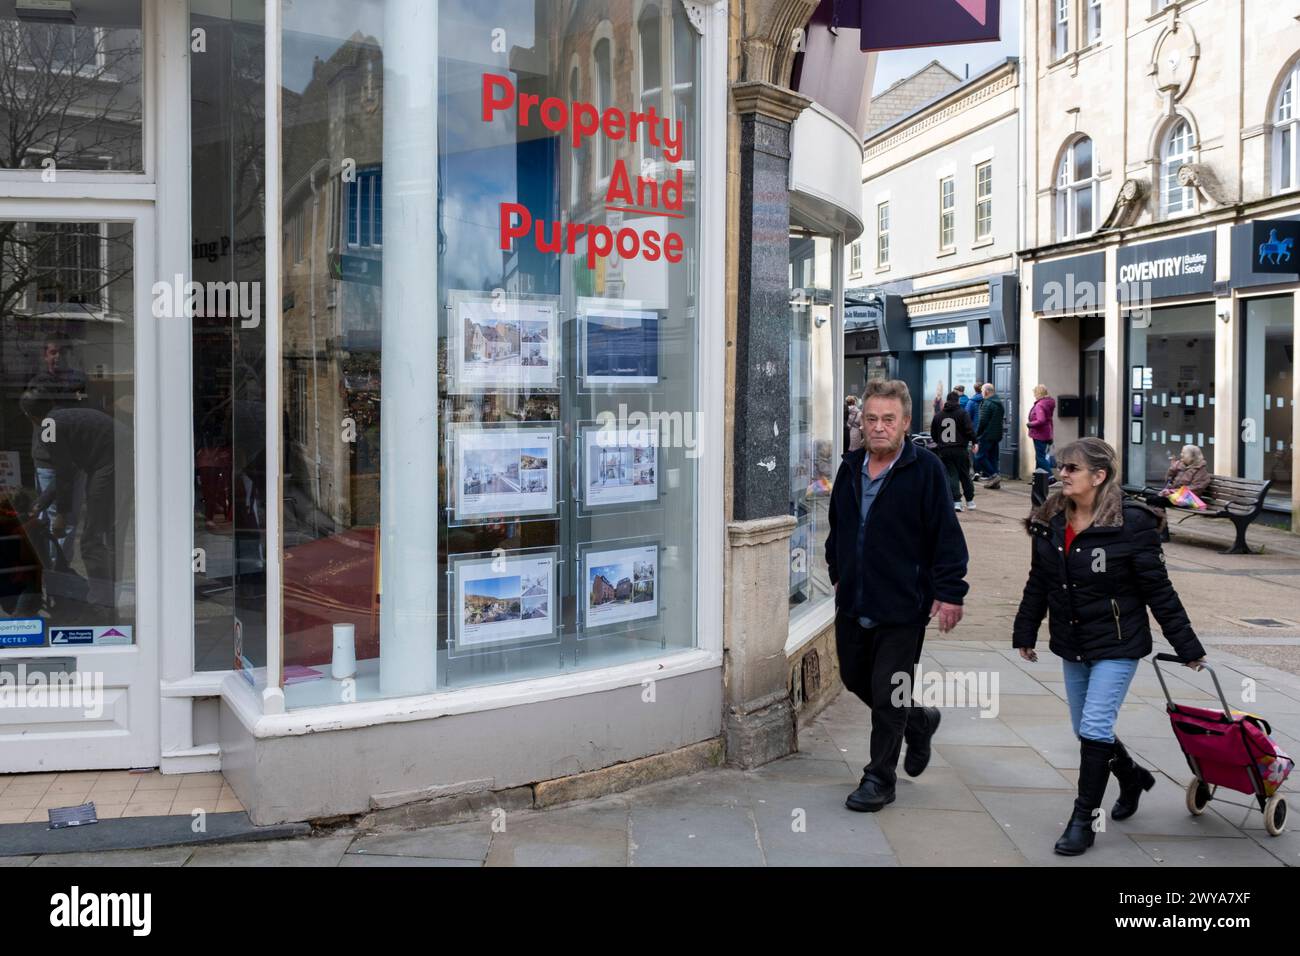 Small business shop front for an estate agent on 30th March 2024 in Stroud, United Kingdom. Housing in the UK is a very important contributing factor and measure in the economy as house prices and the property market continues to rise, pricing many people of lower incomes out of owning their own homes. Stroud is a market town and civil parish in Gloucestershire. Stock Photo